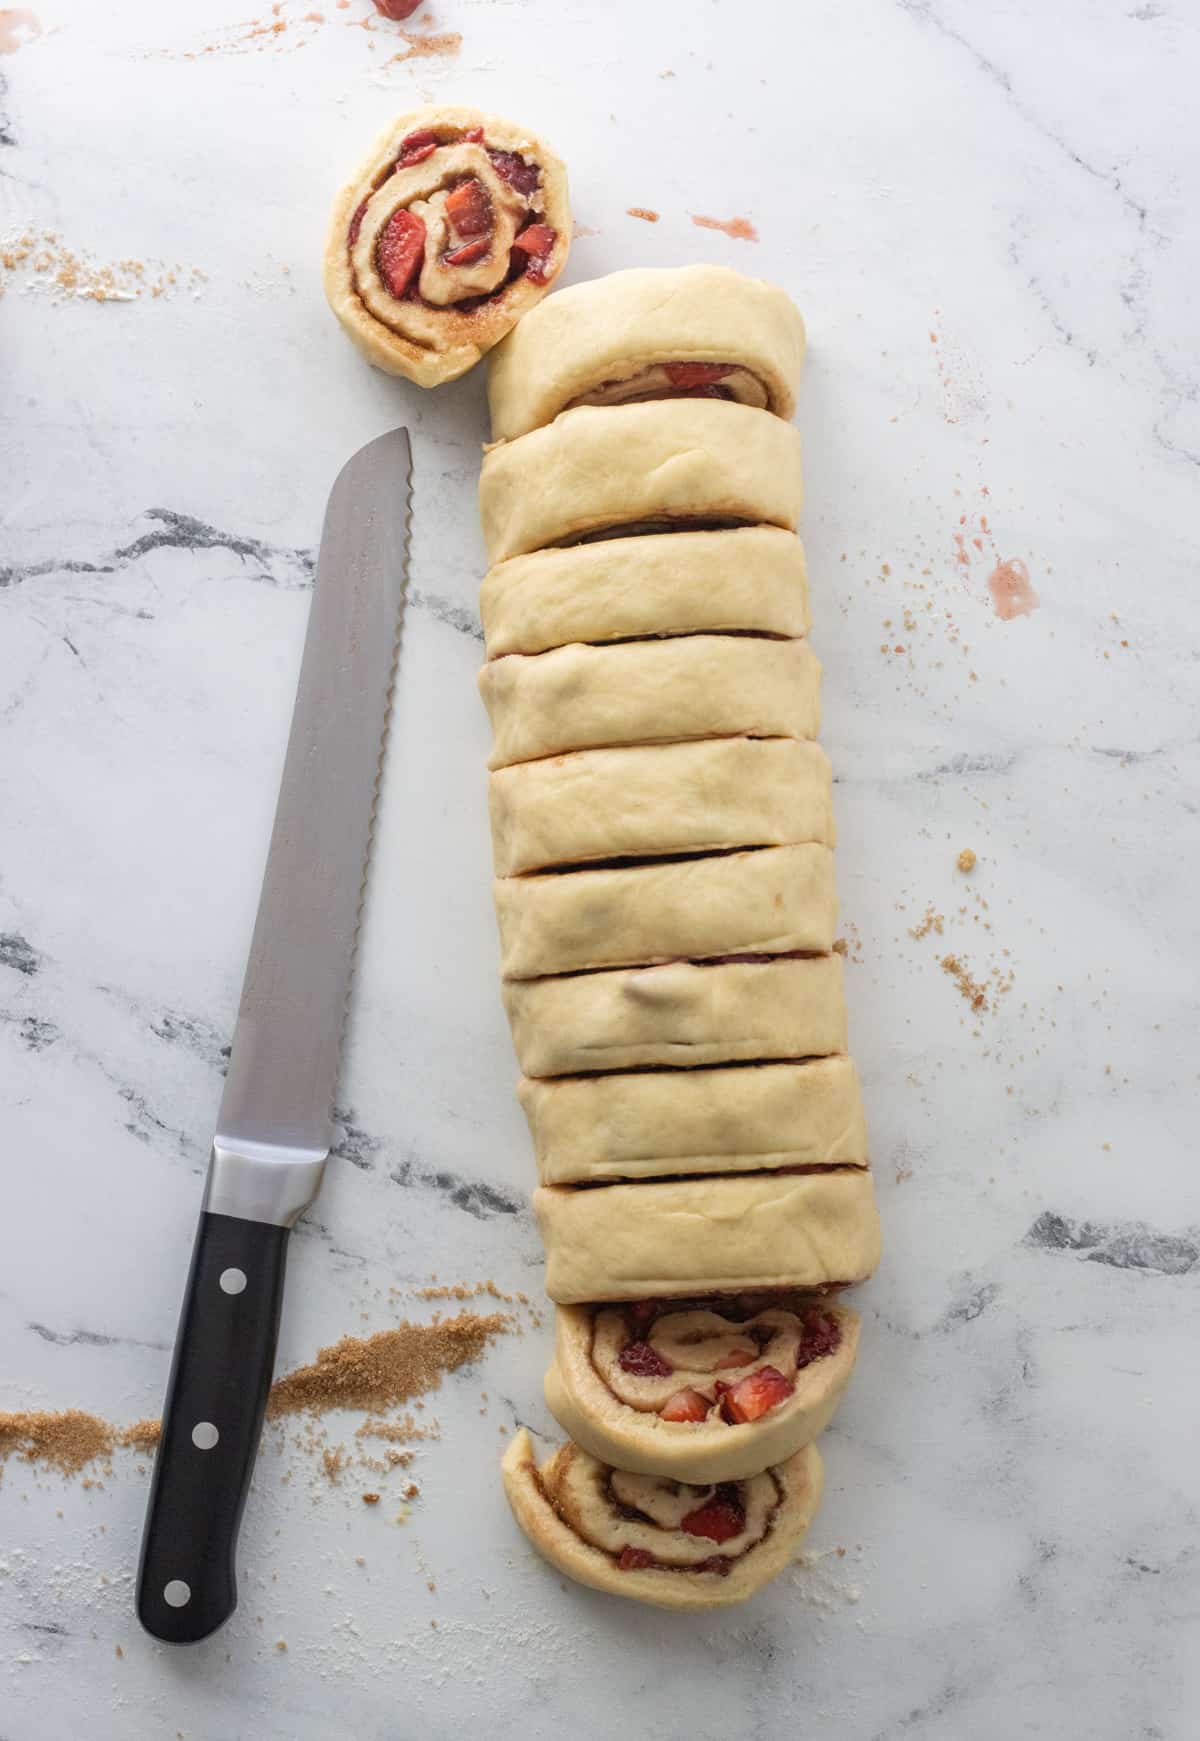 Strawberry cinnamon roll log cut into slices next to a serrated knife.